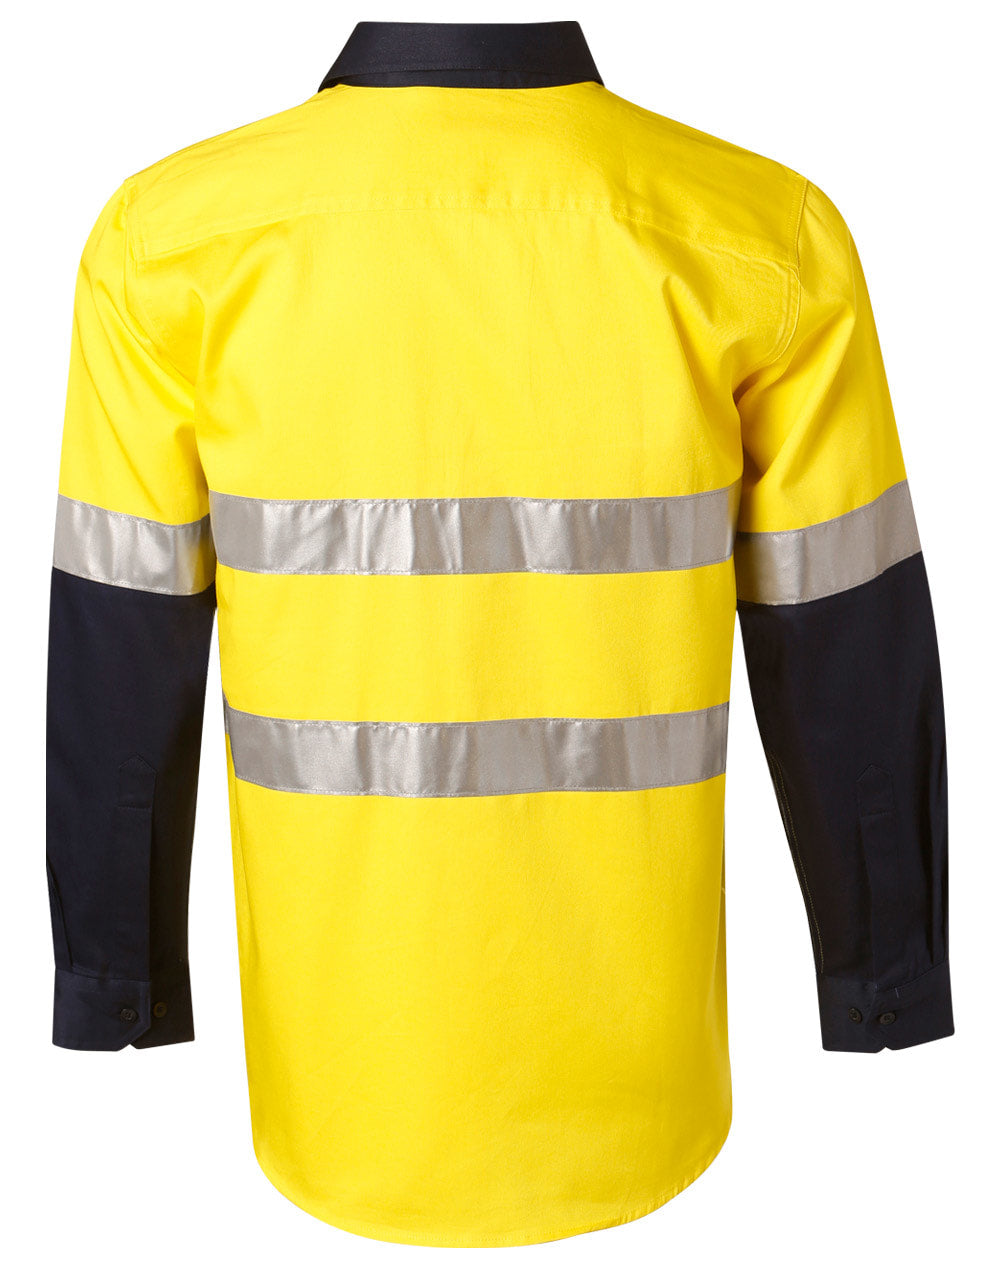 AIW SW68 LONG SLEEVE SAFETY SHIRT